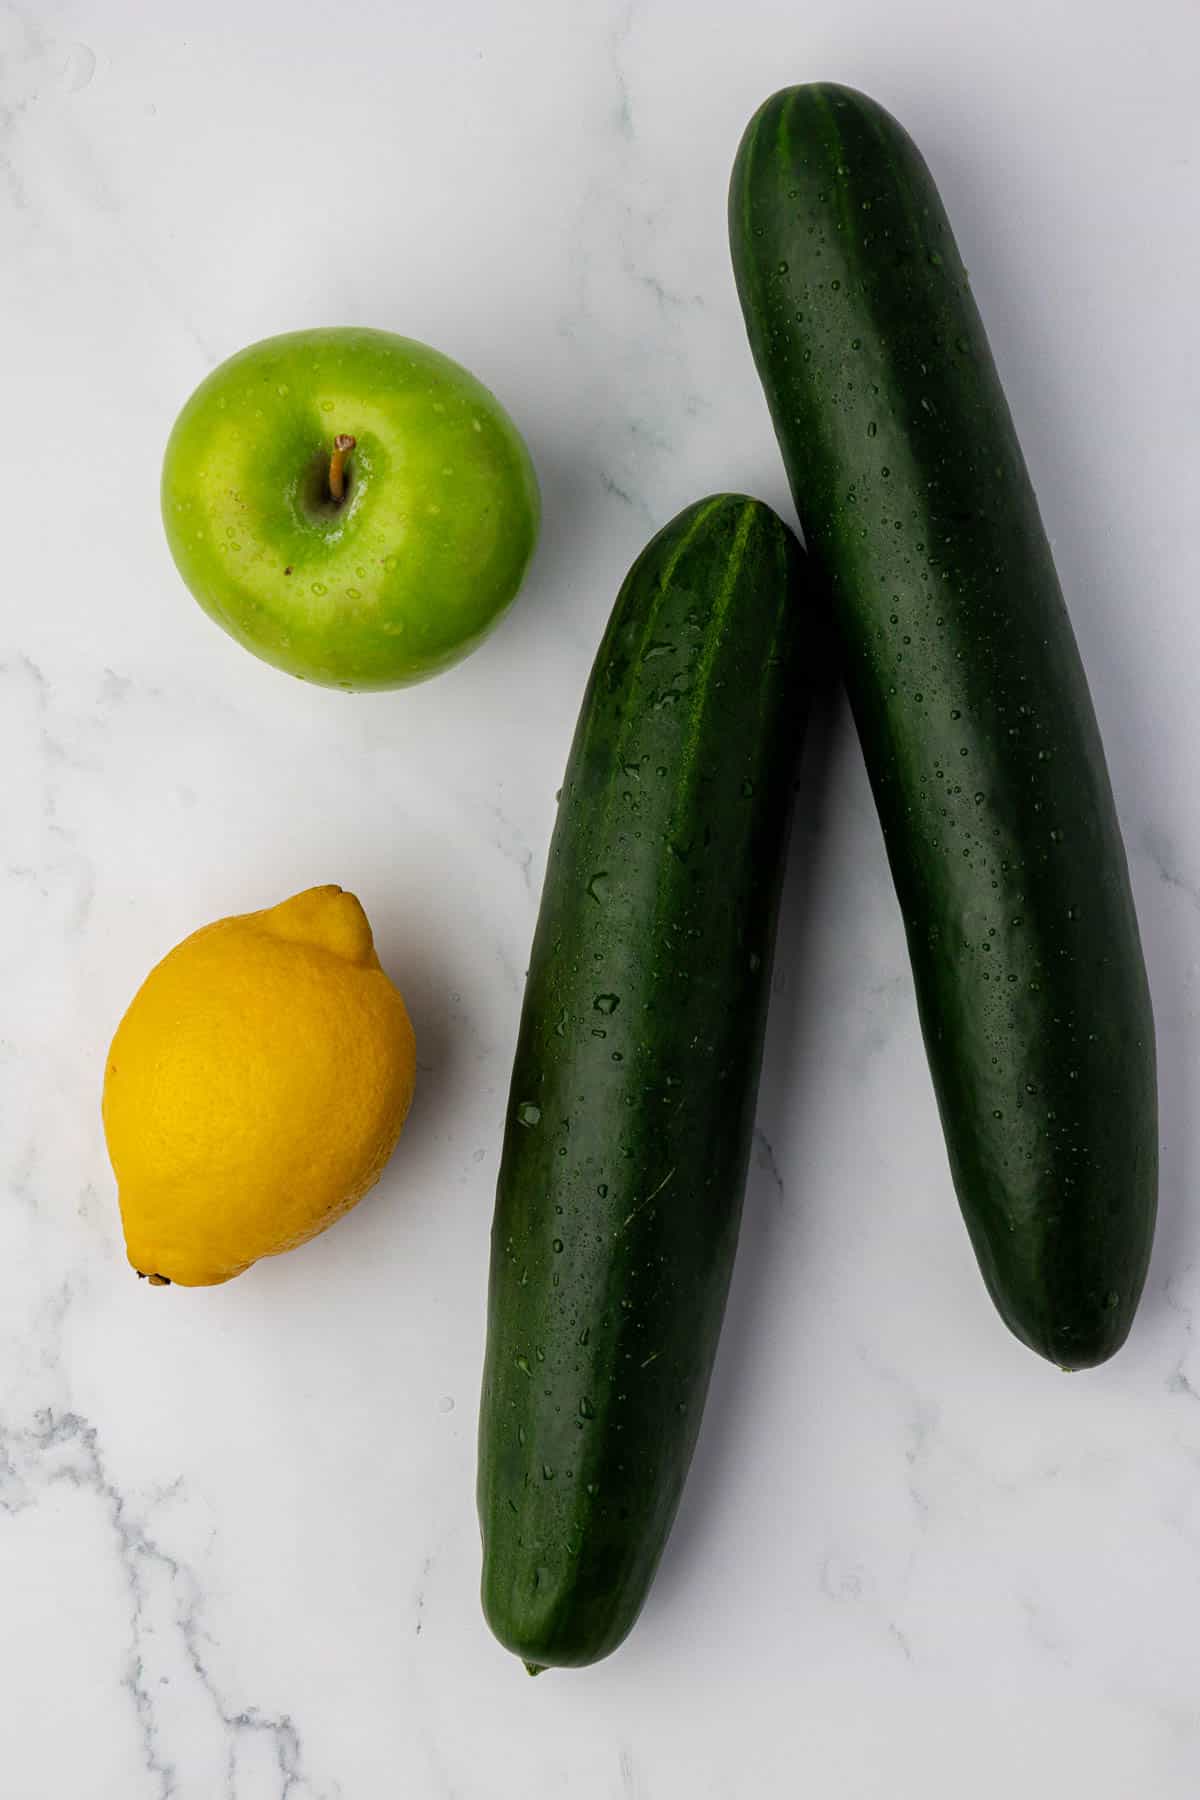 two cucumbers, a lemon, and a green apple